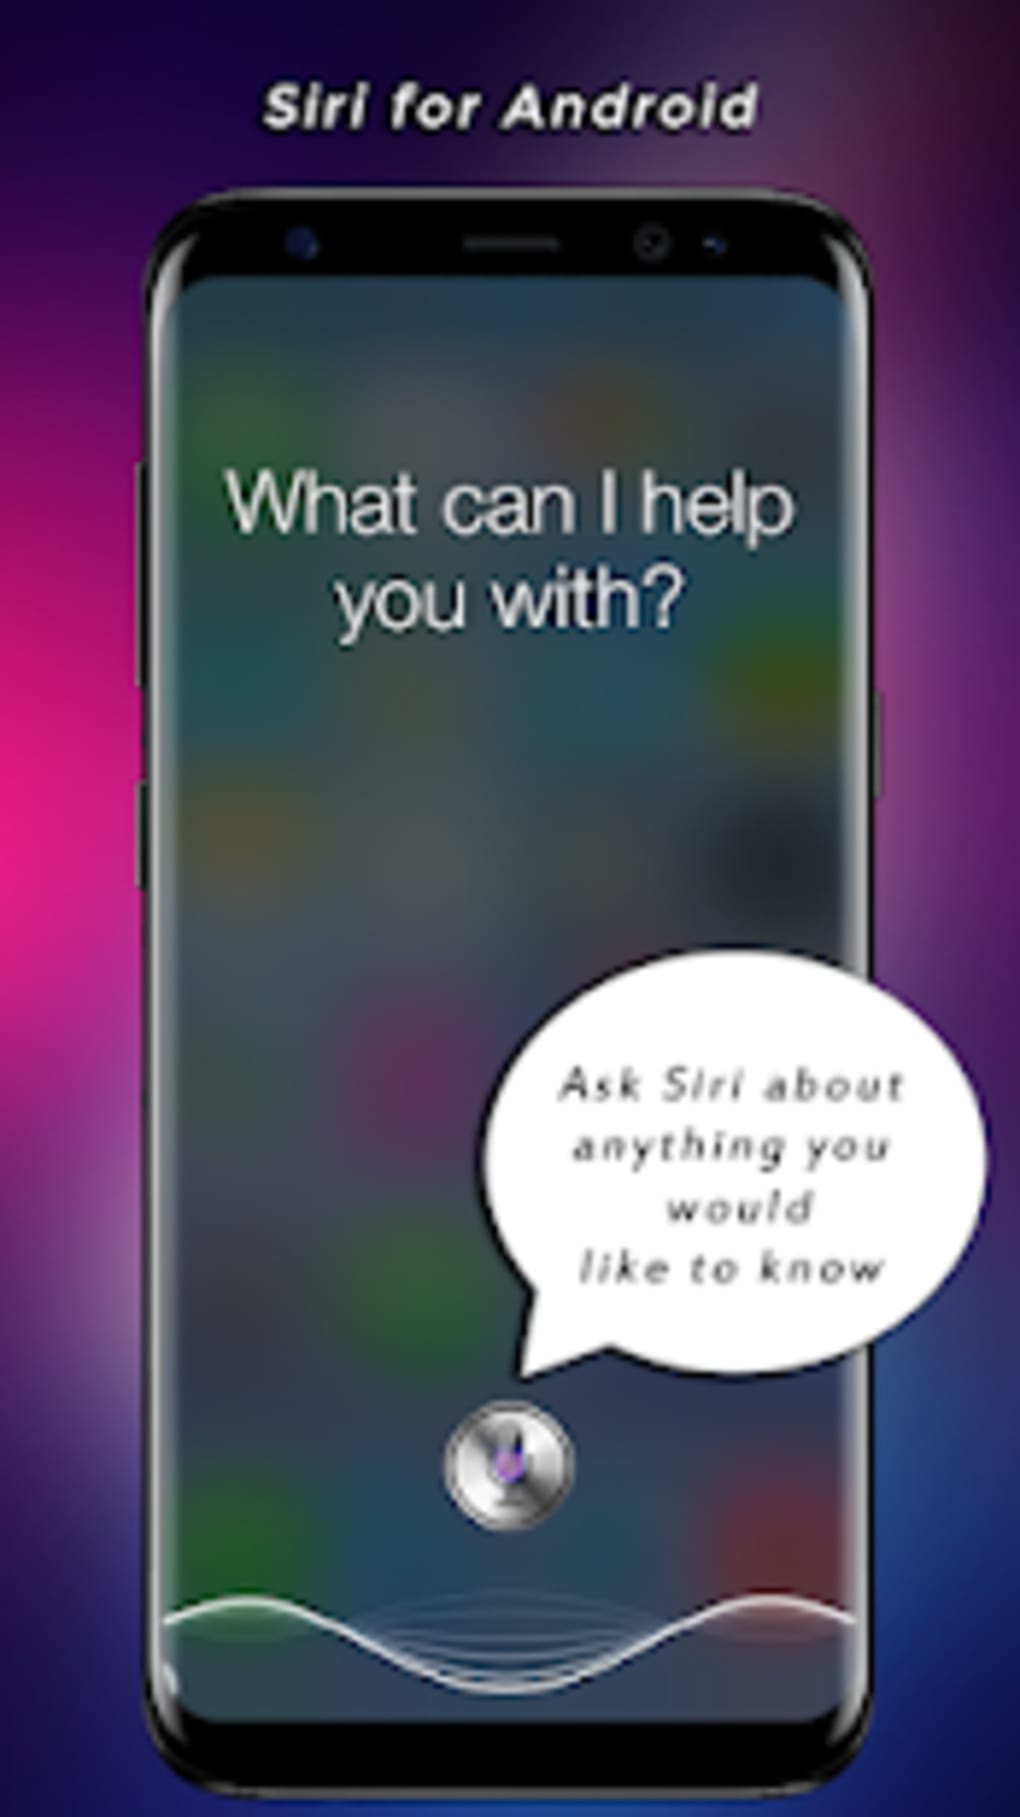 siri voice assistant for android